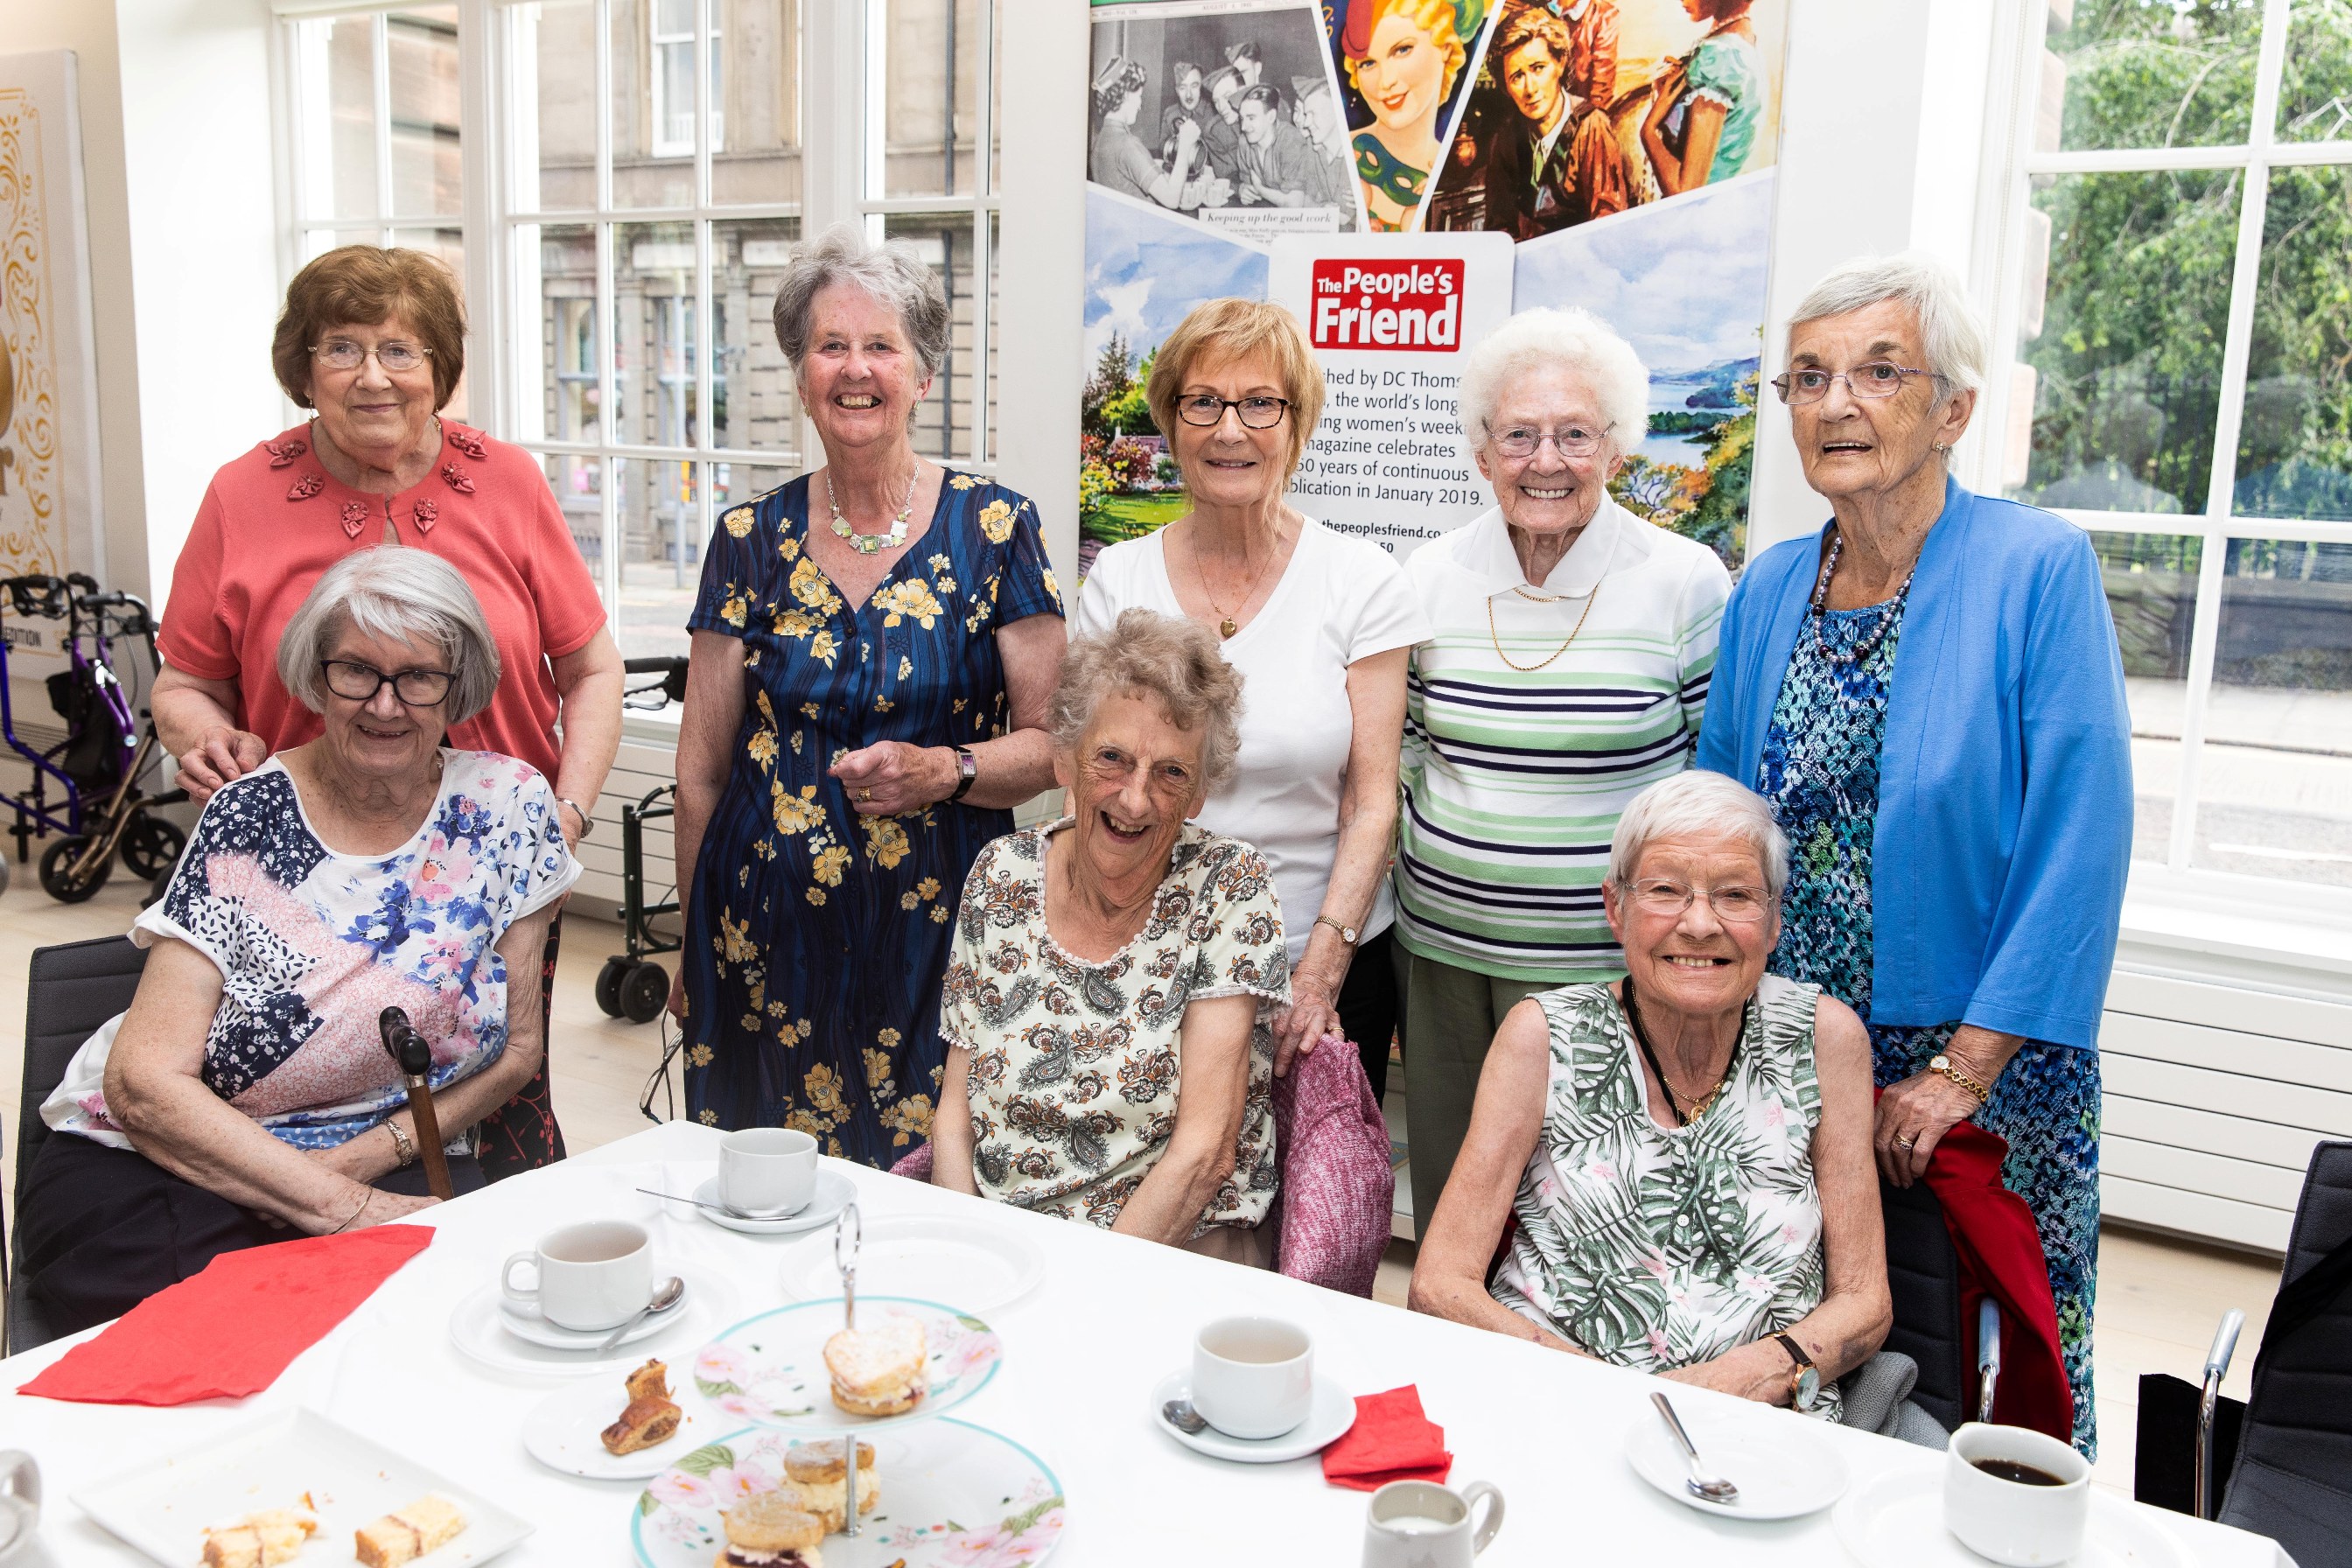 The Peoples Friend - Dundee - The Peoples Friend Tea Party - CR0011051 - Dundee - Picture Shows:  - Sunday 30th June 2019 -Attendees enjoy the social chatting at the Peoples Friends Tea Party-  Steve Brown / DCT Media